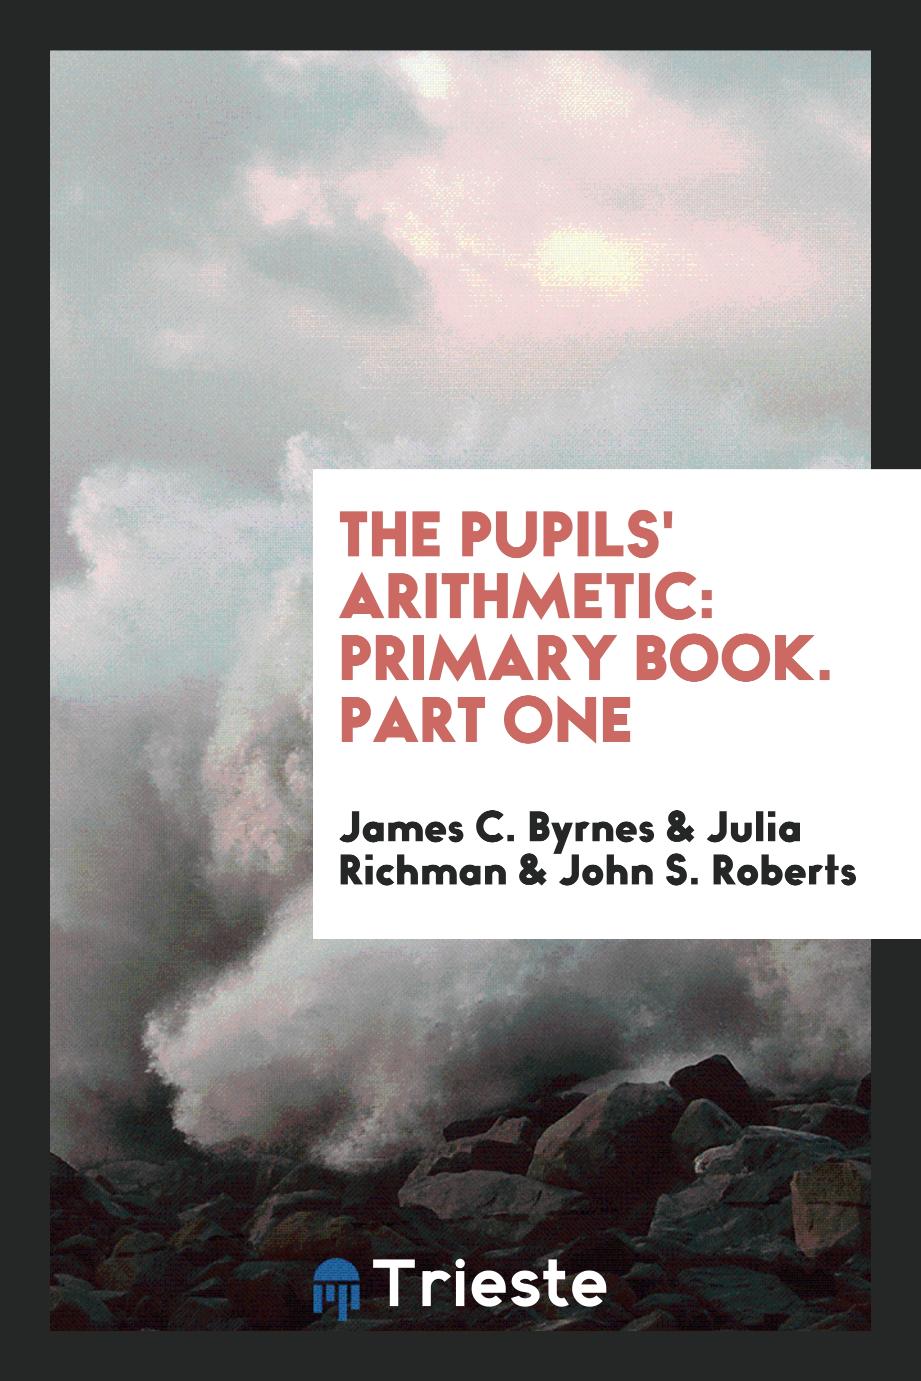 The Pupils' Arithmetic: Primary Book. Part One